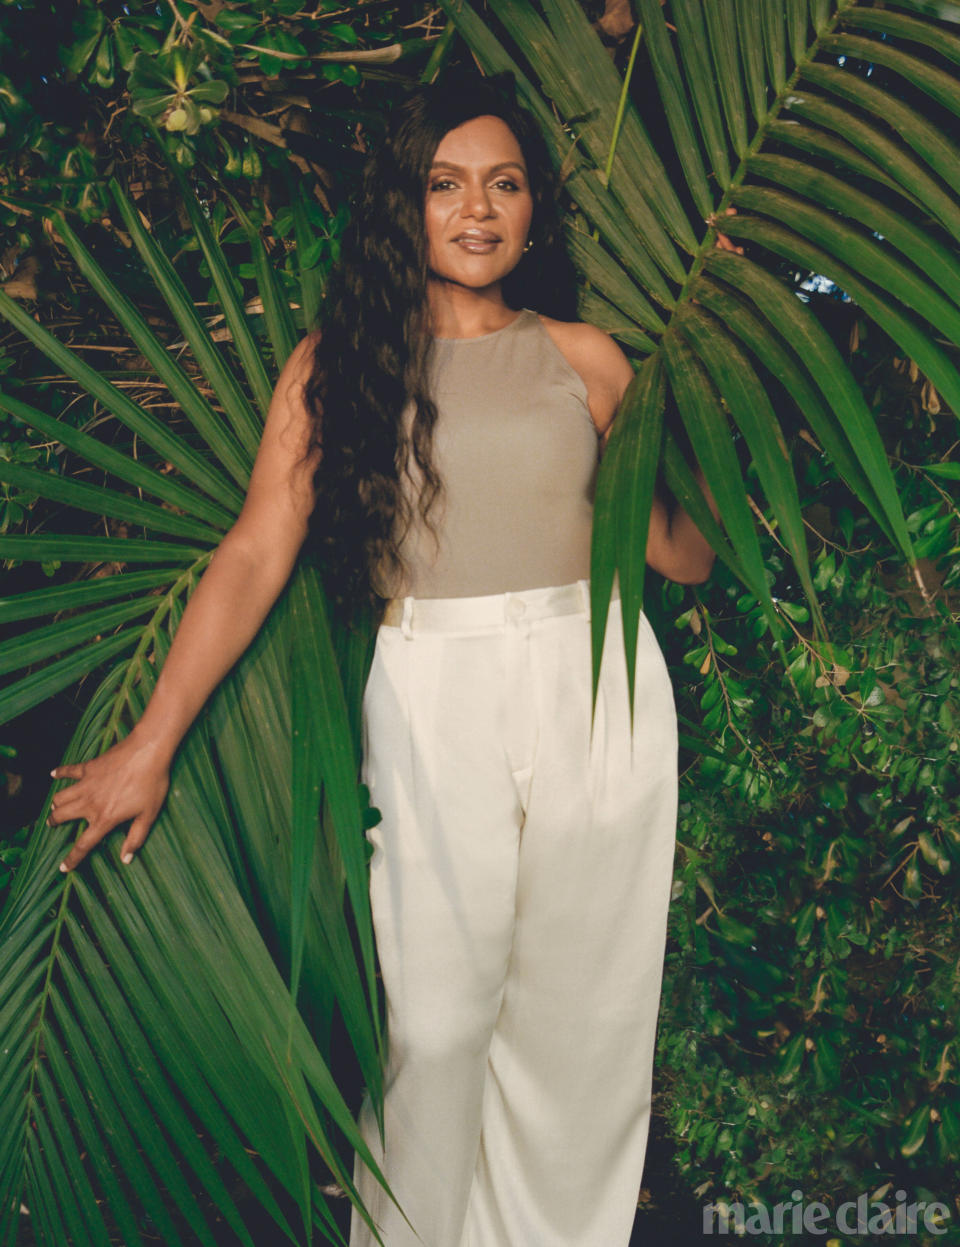 Mindy Kaling poses with palm fronds